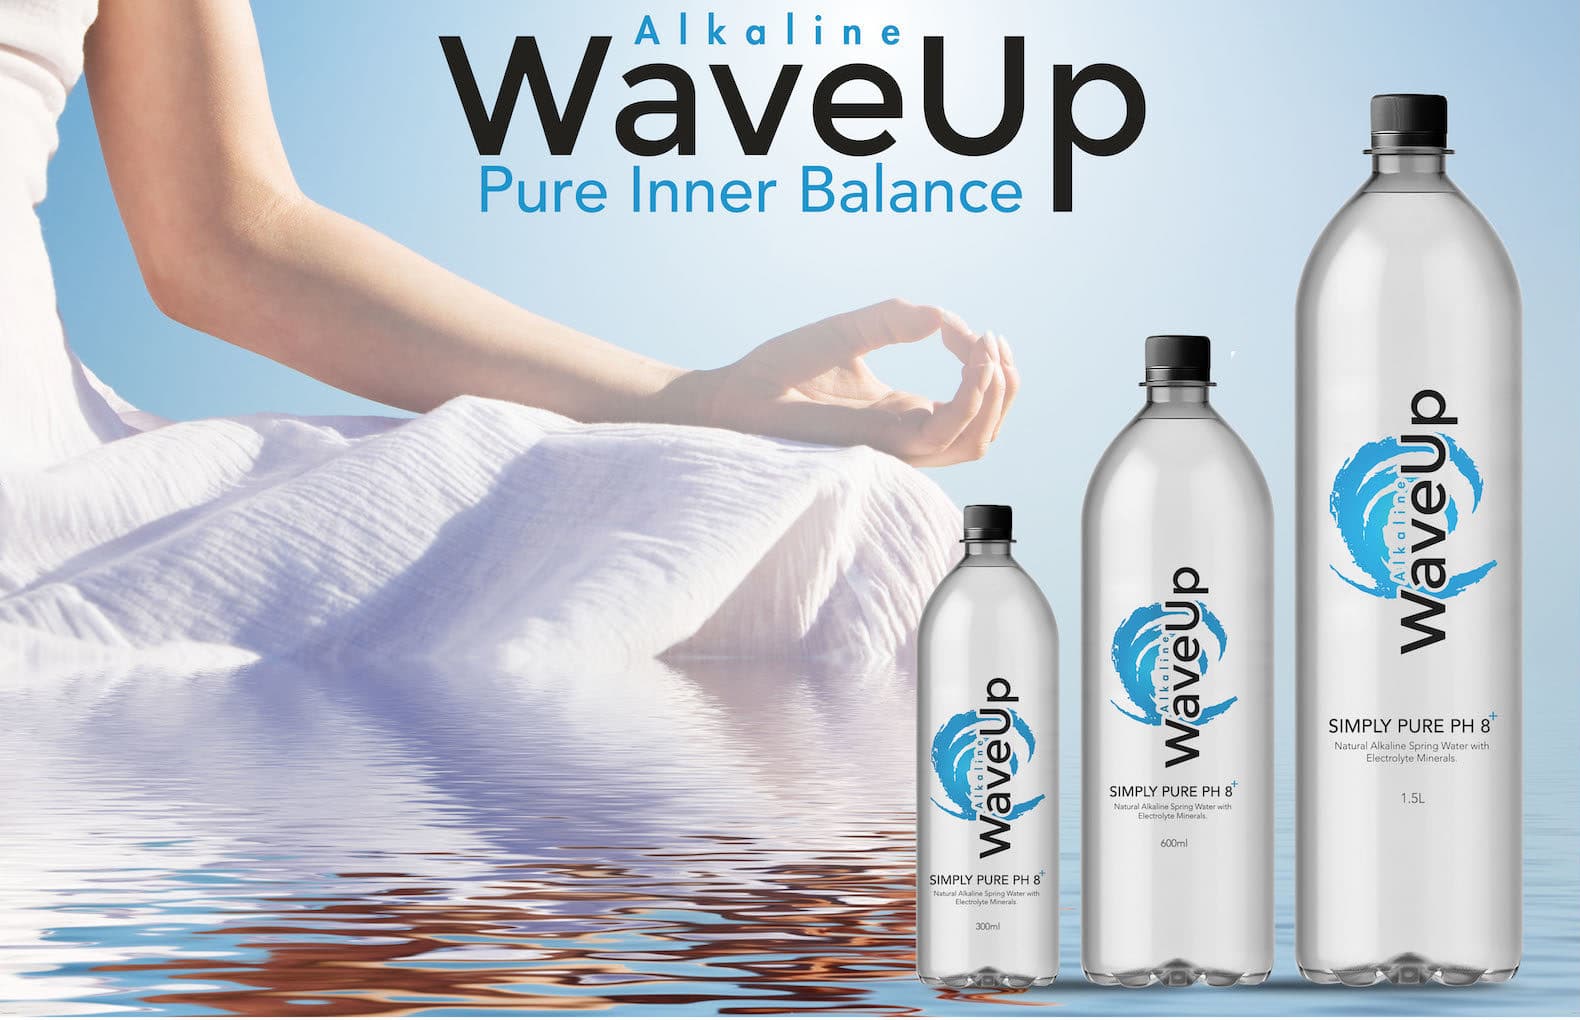 Marketing advertising of a water bottle and a woman doing ypga